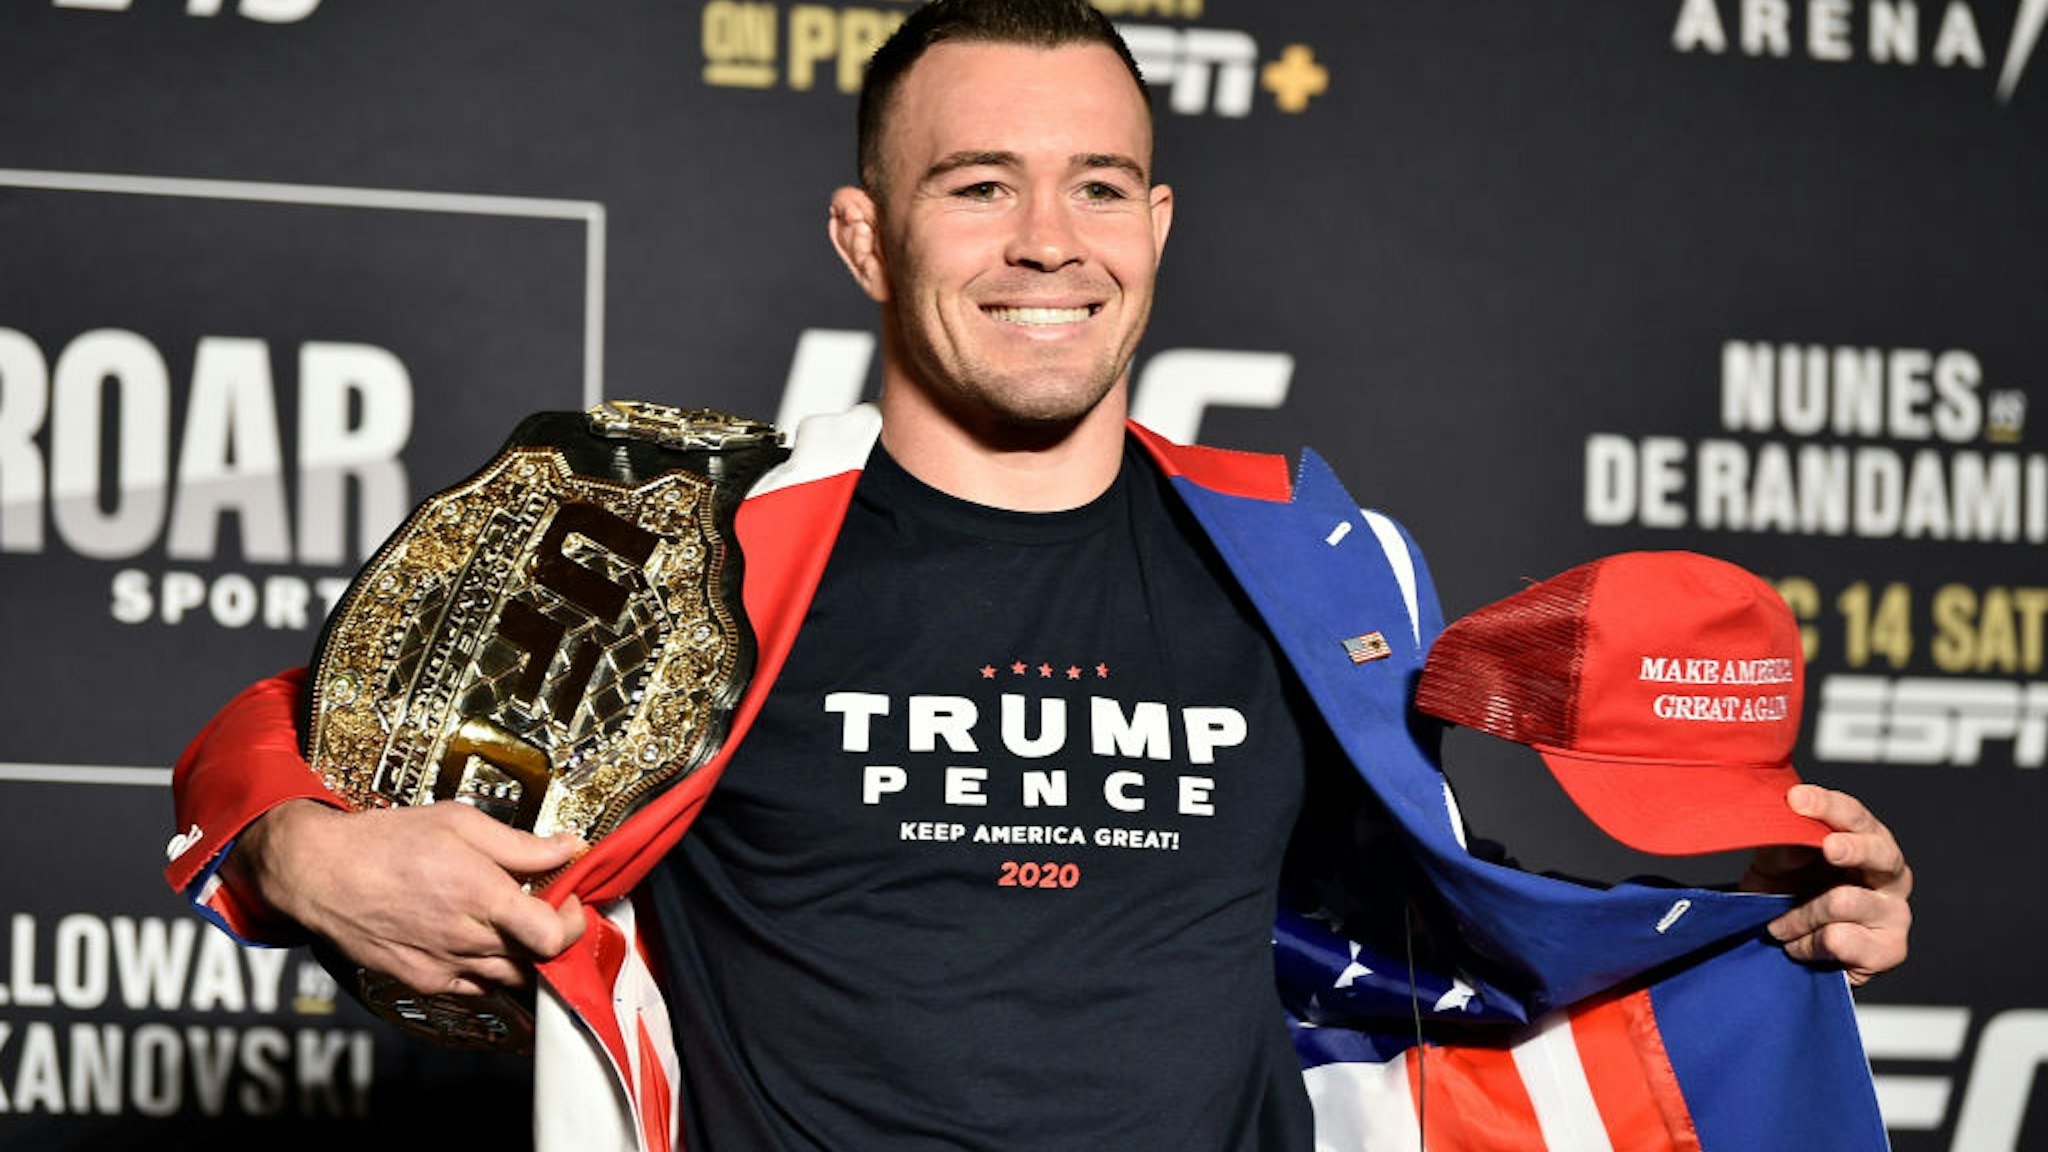 LAS VEGAS, NEVADA - DECEMBER 12: Colby Covington poses for the media during the UFC 245 Ultimate Media Day at the Red Rock Casino Resort on December 12, 2019 in Las Vegas, Nevada. (Photo by Chris Unger/Zuffa LLC via Getty Images)